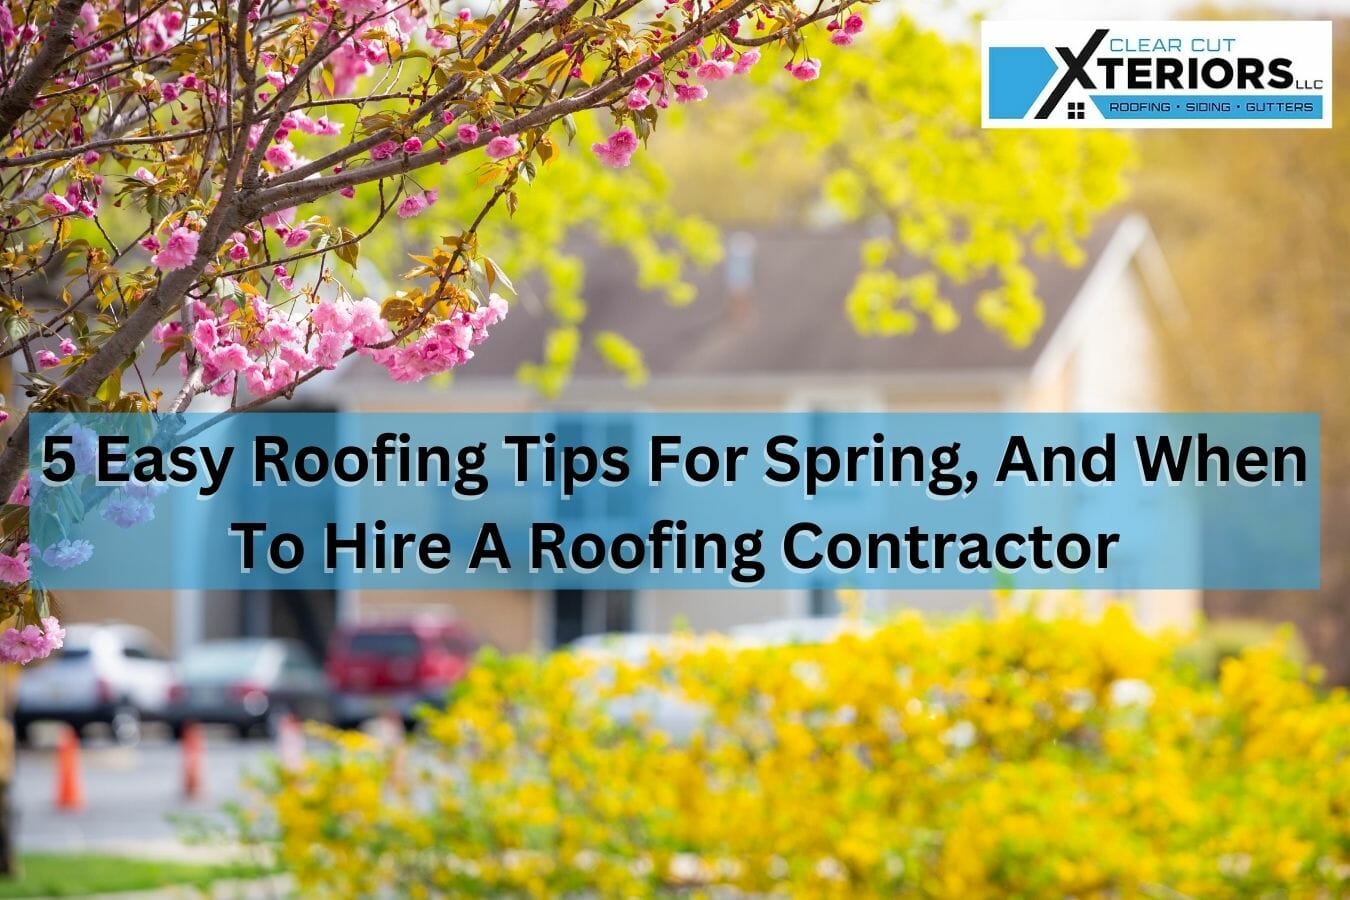 5 Easy Roofing Tips For Spring, And When To Hire A Roofing Contractor